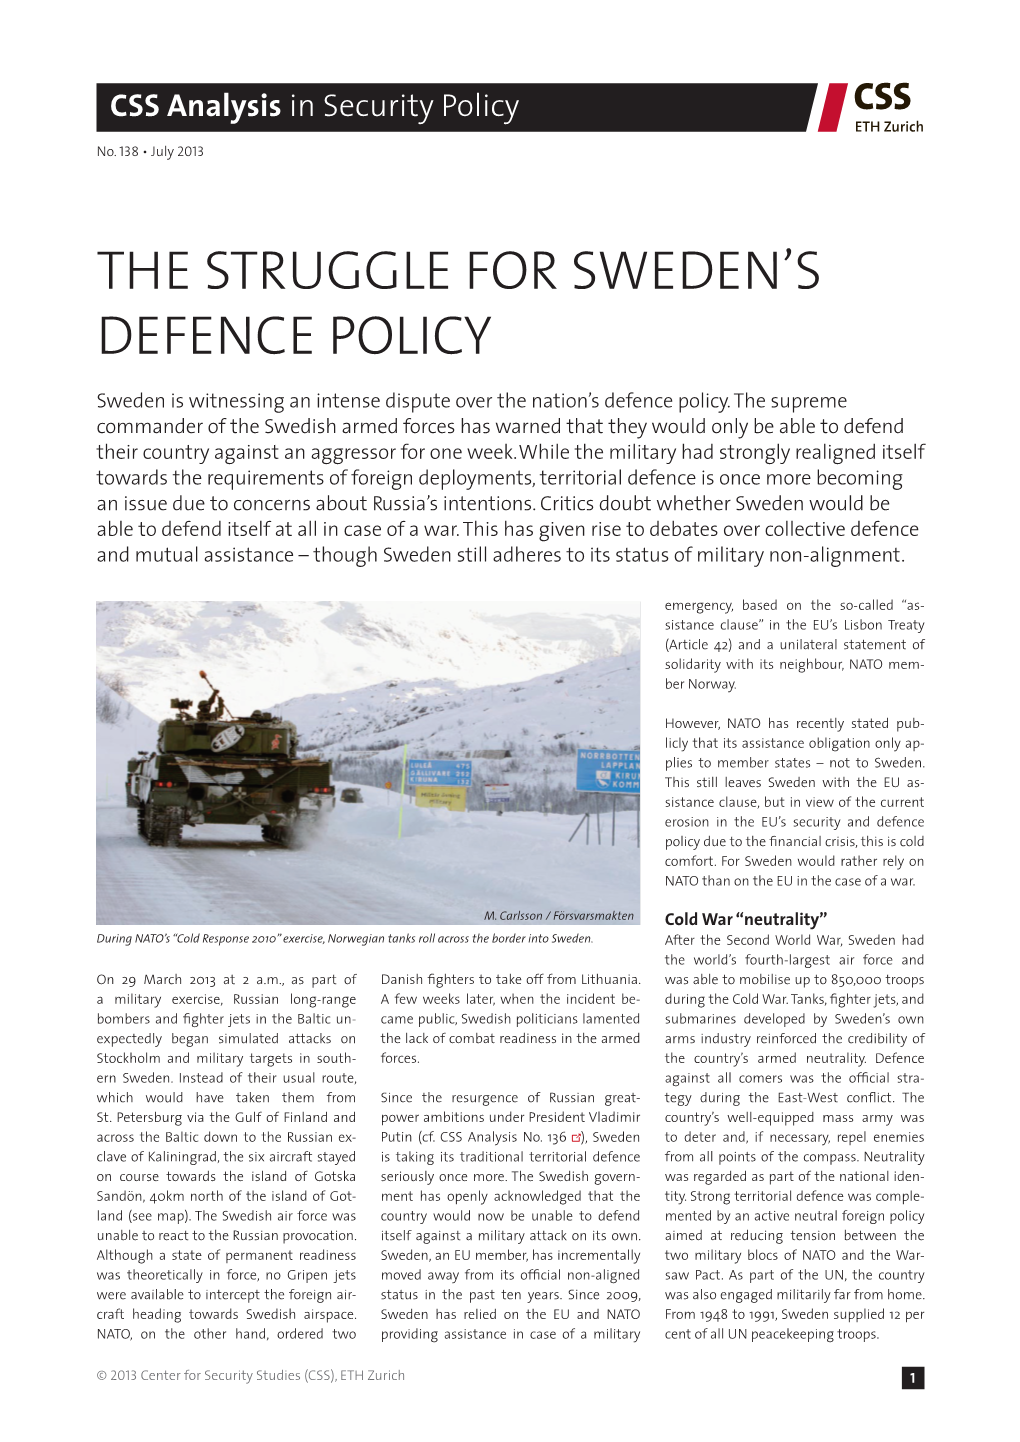 THE Struggle for Sweden's Defence Policy